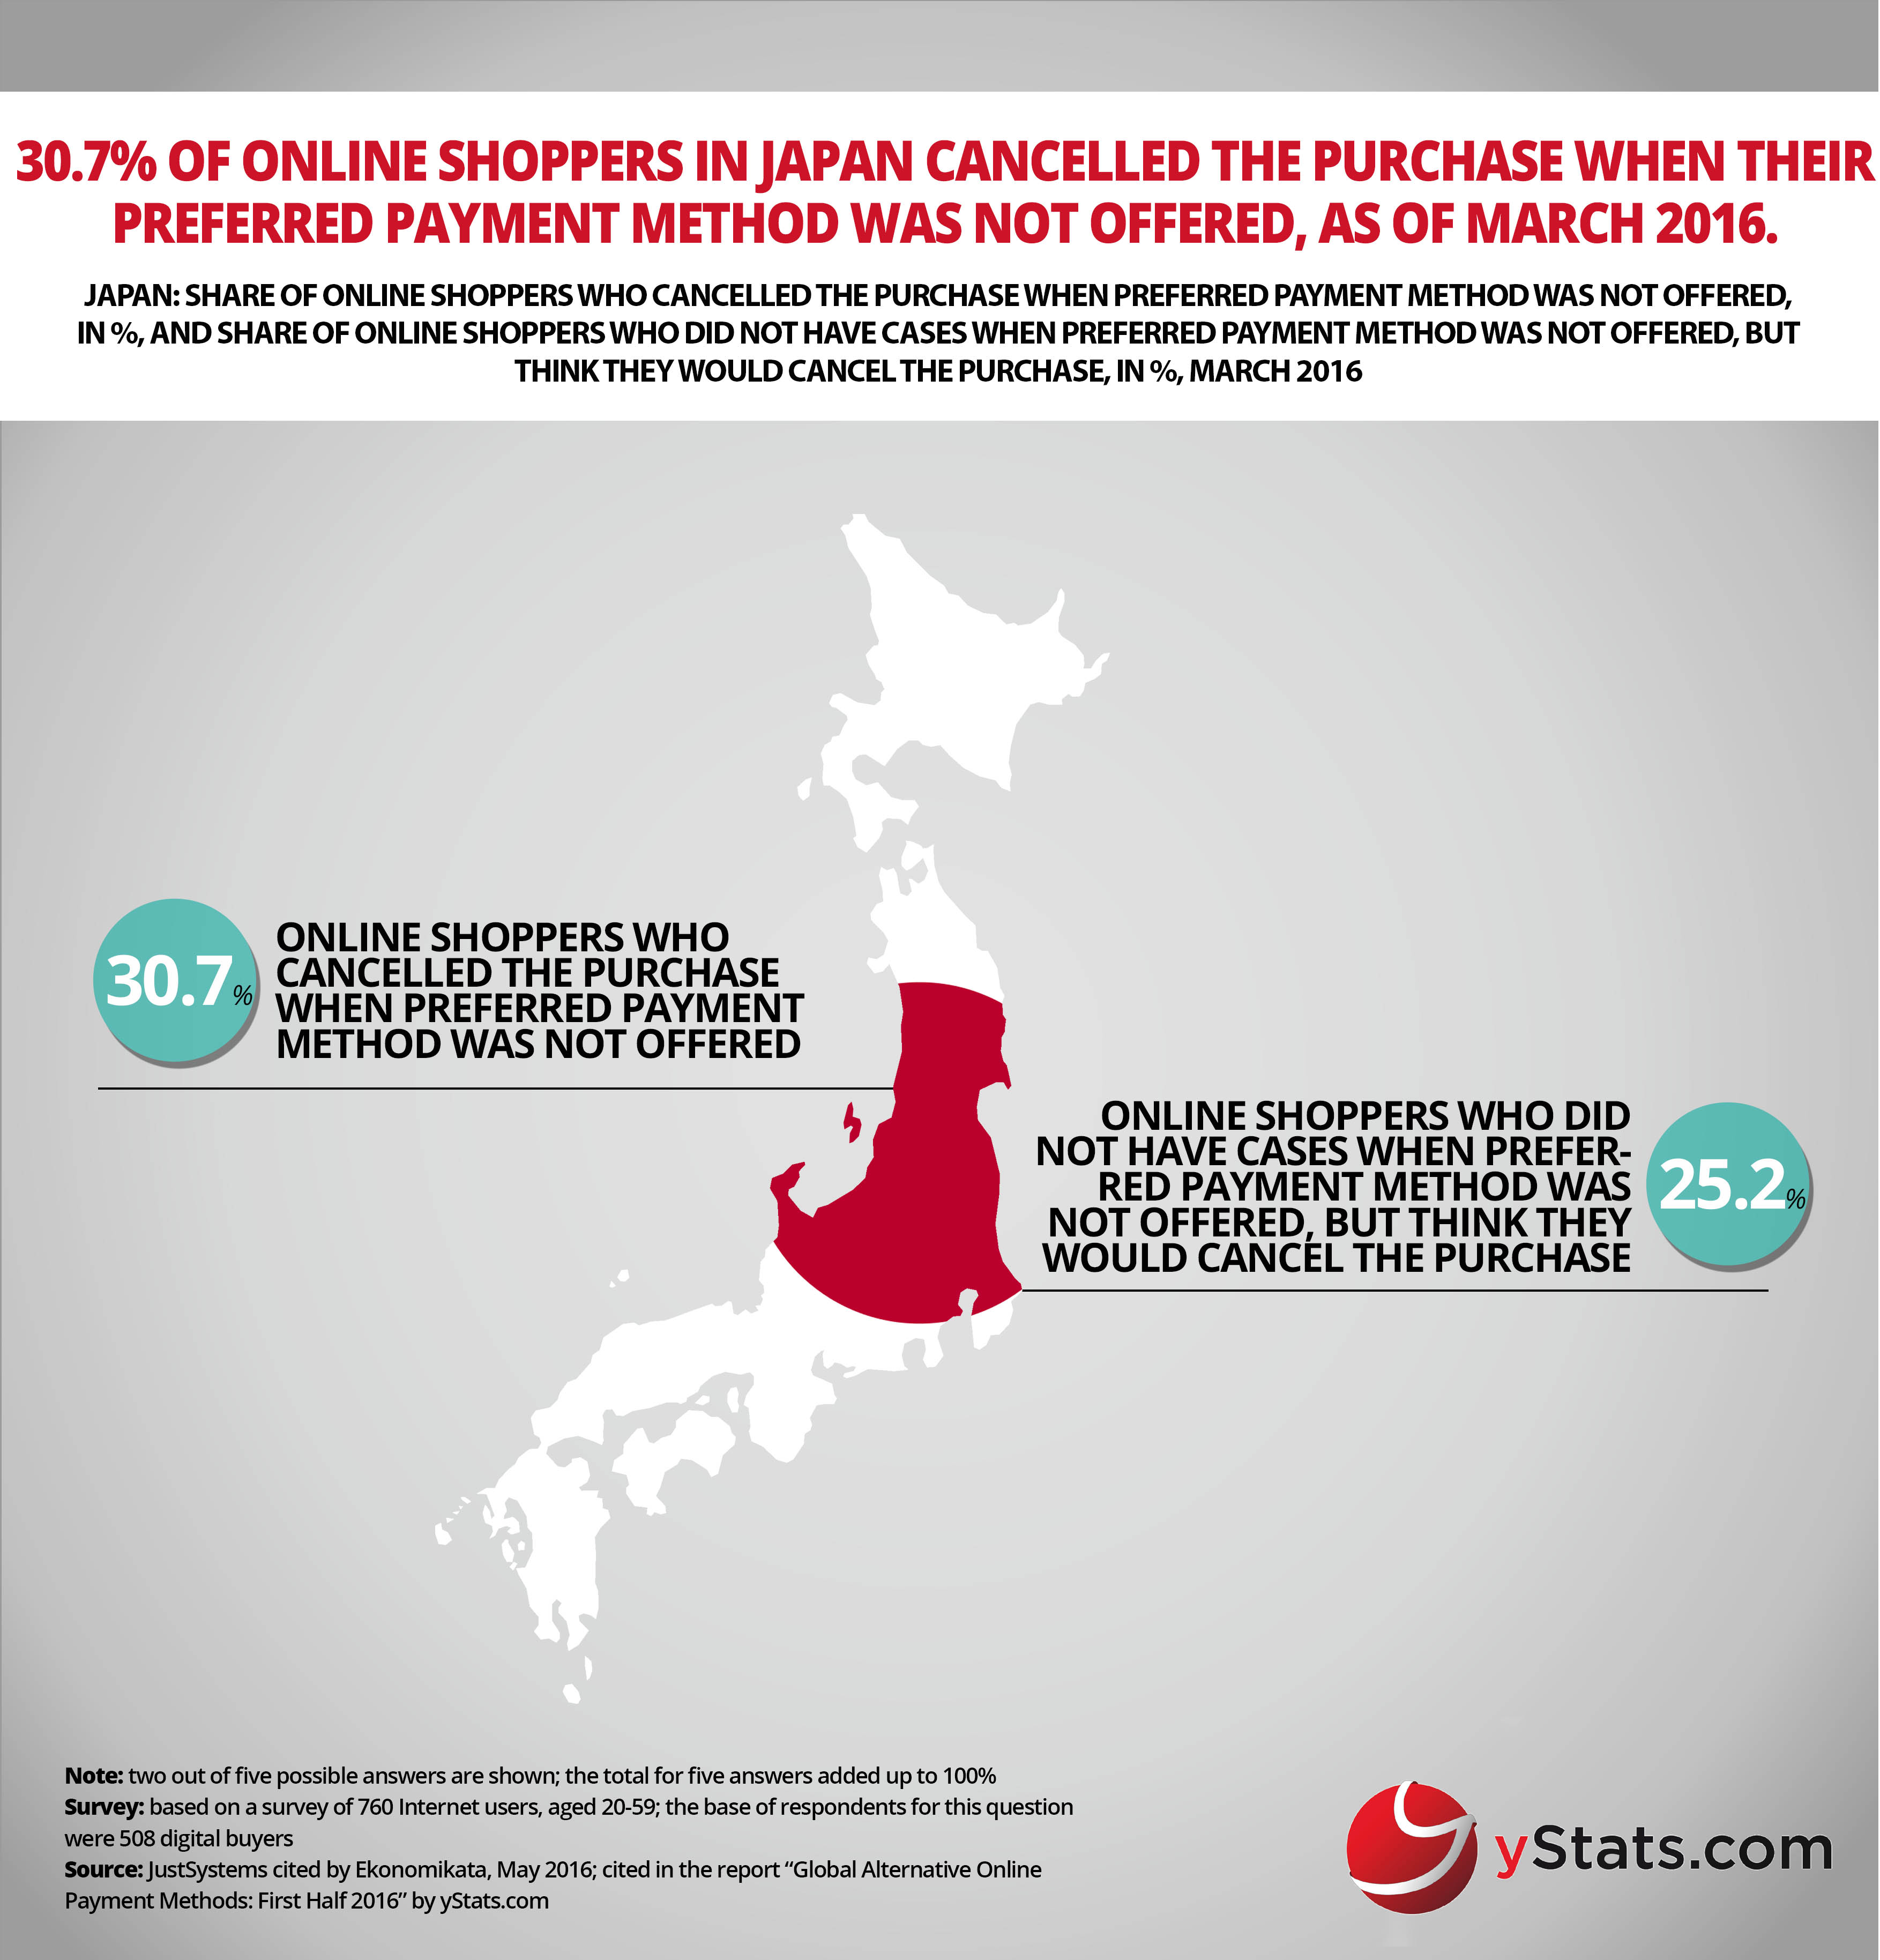 online shoppers cancel the purchase when do not have preferred payment method